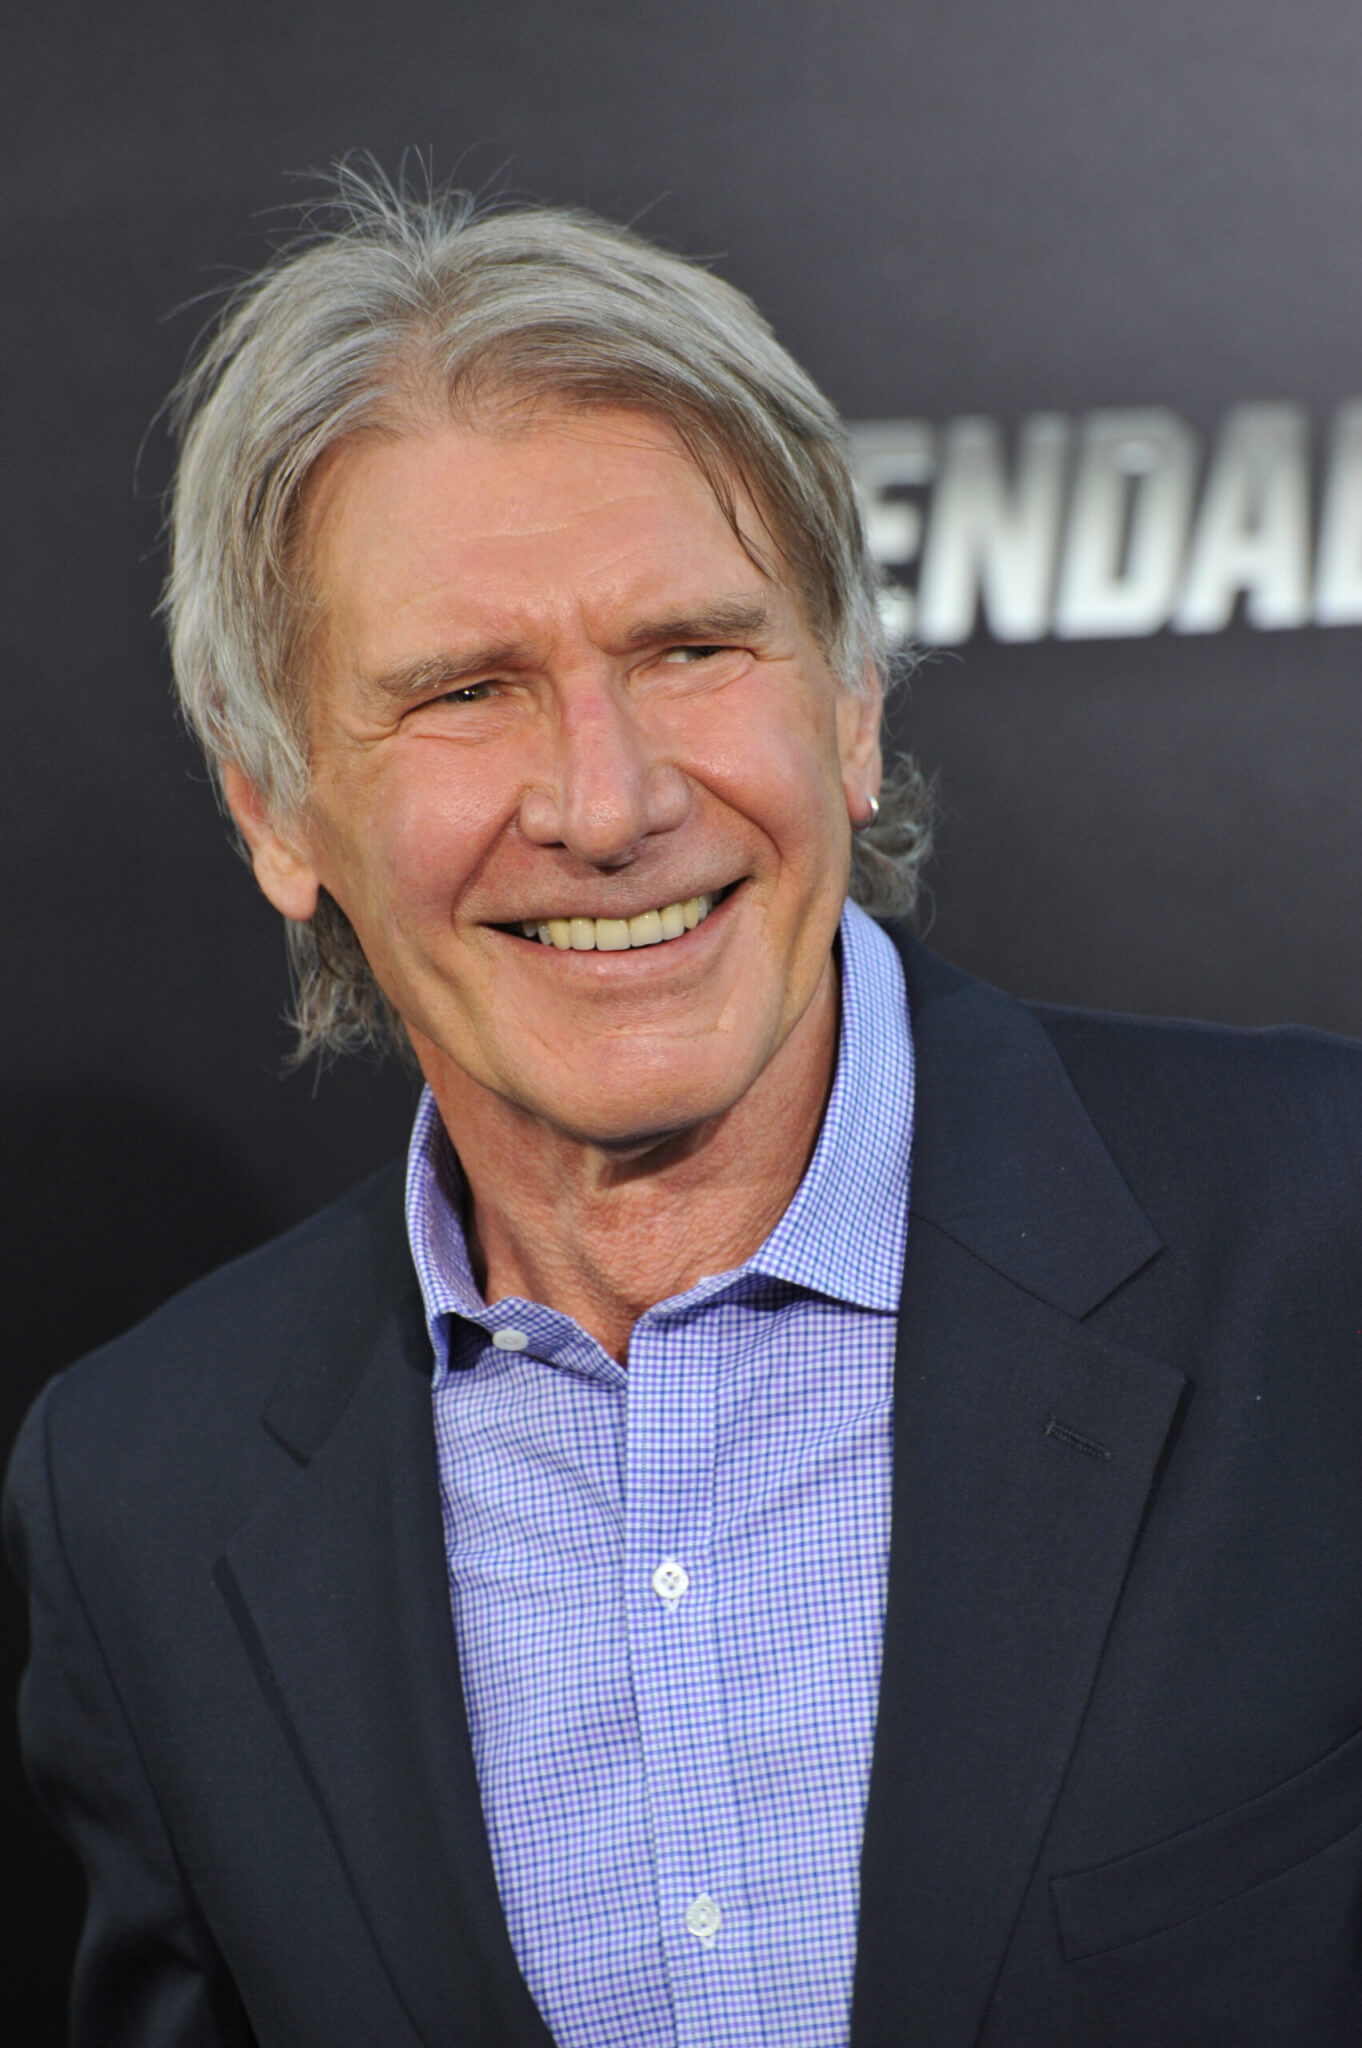 Harrison Ford at the Los Angeles premiere of his movie "The Expendables 3" in 2014